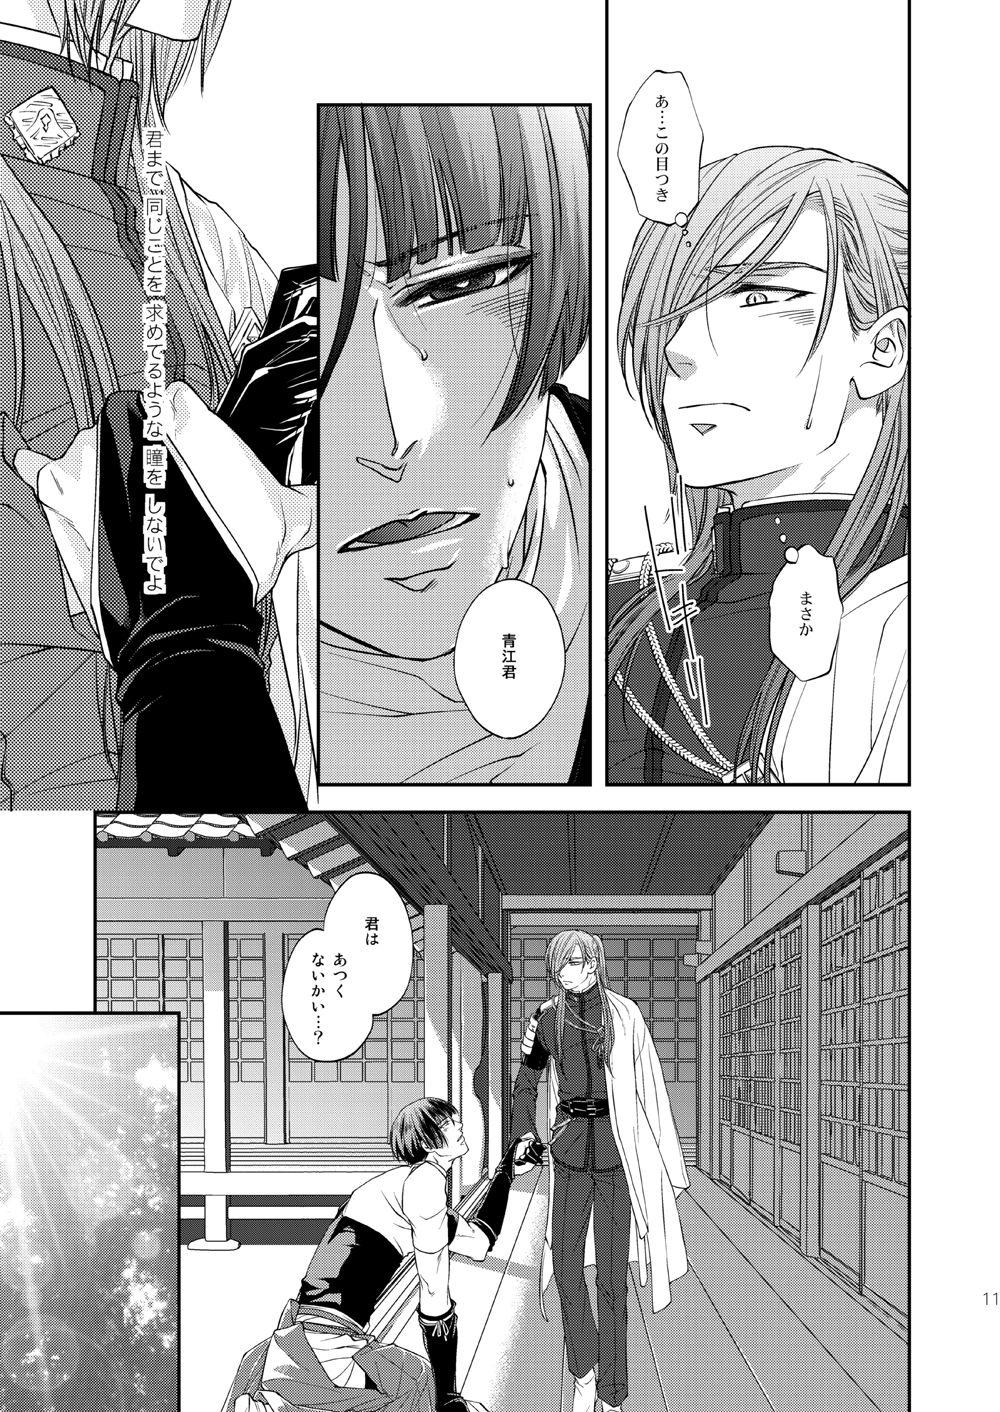 Hot Whores Every Breaking Wave - Touken ranbu Super - Page 10